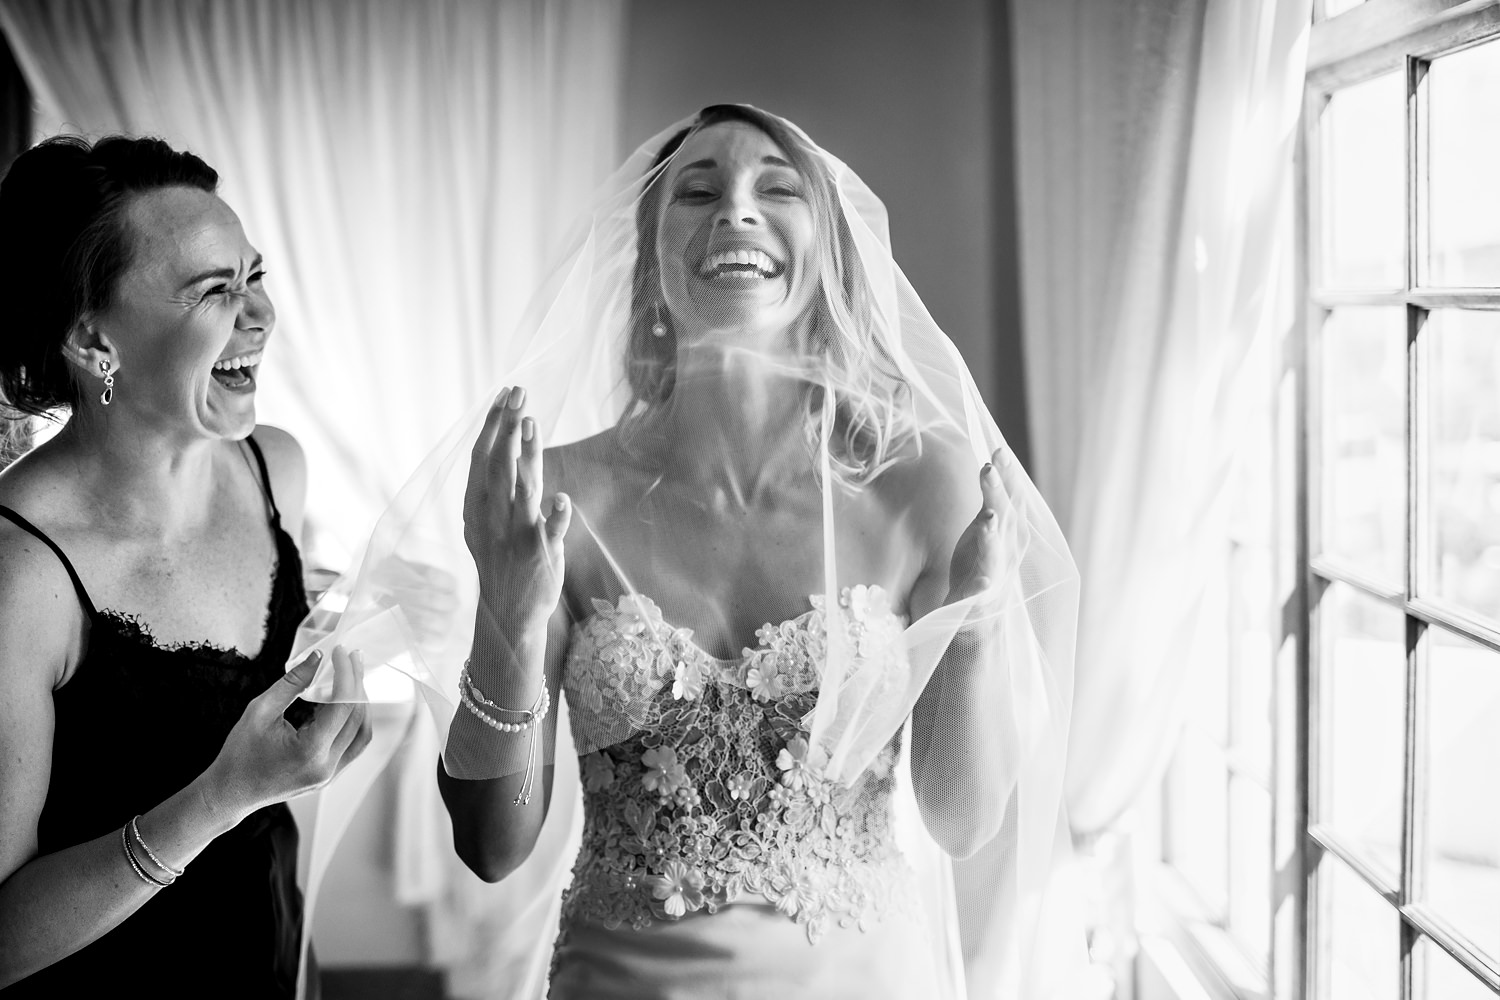 A veiled bride at Blomfontein is overcome with emotion as she lifts her hands to the sky with a big smile and closed eyes, the bridesmaid looking on with joy.